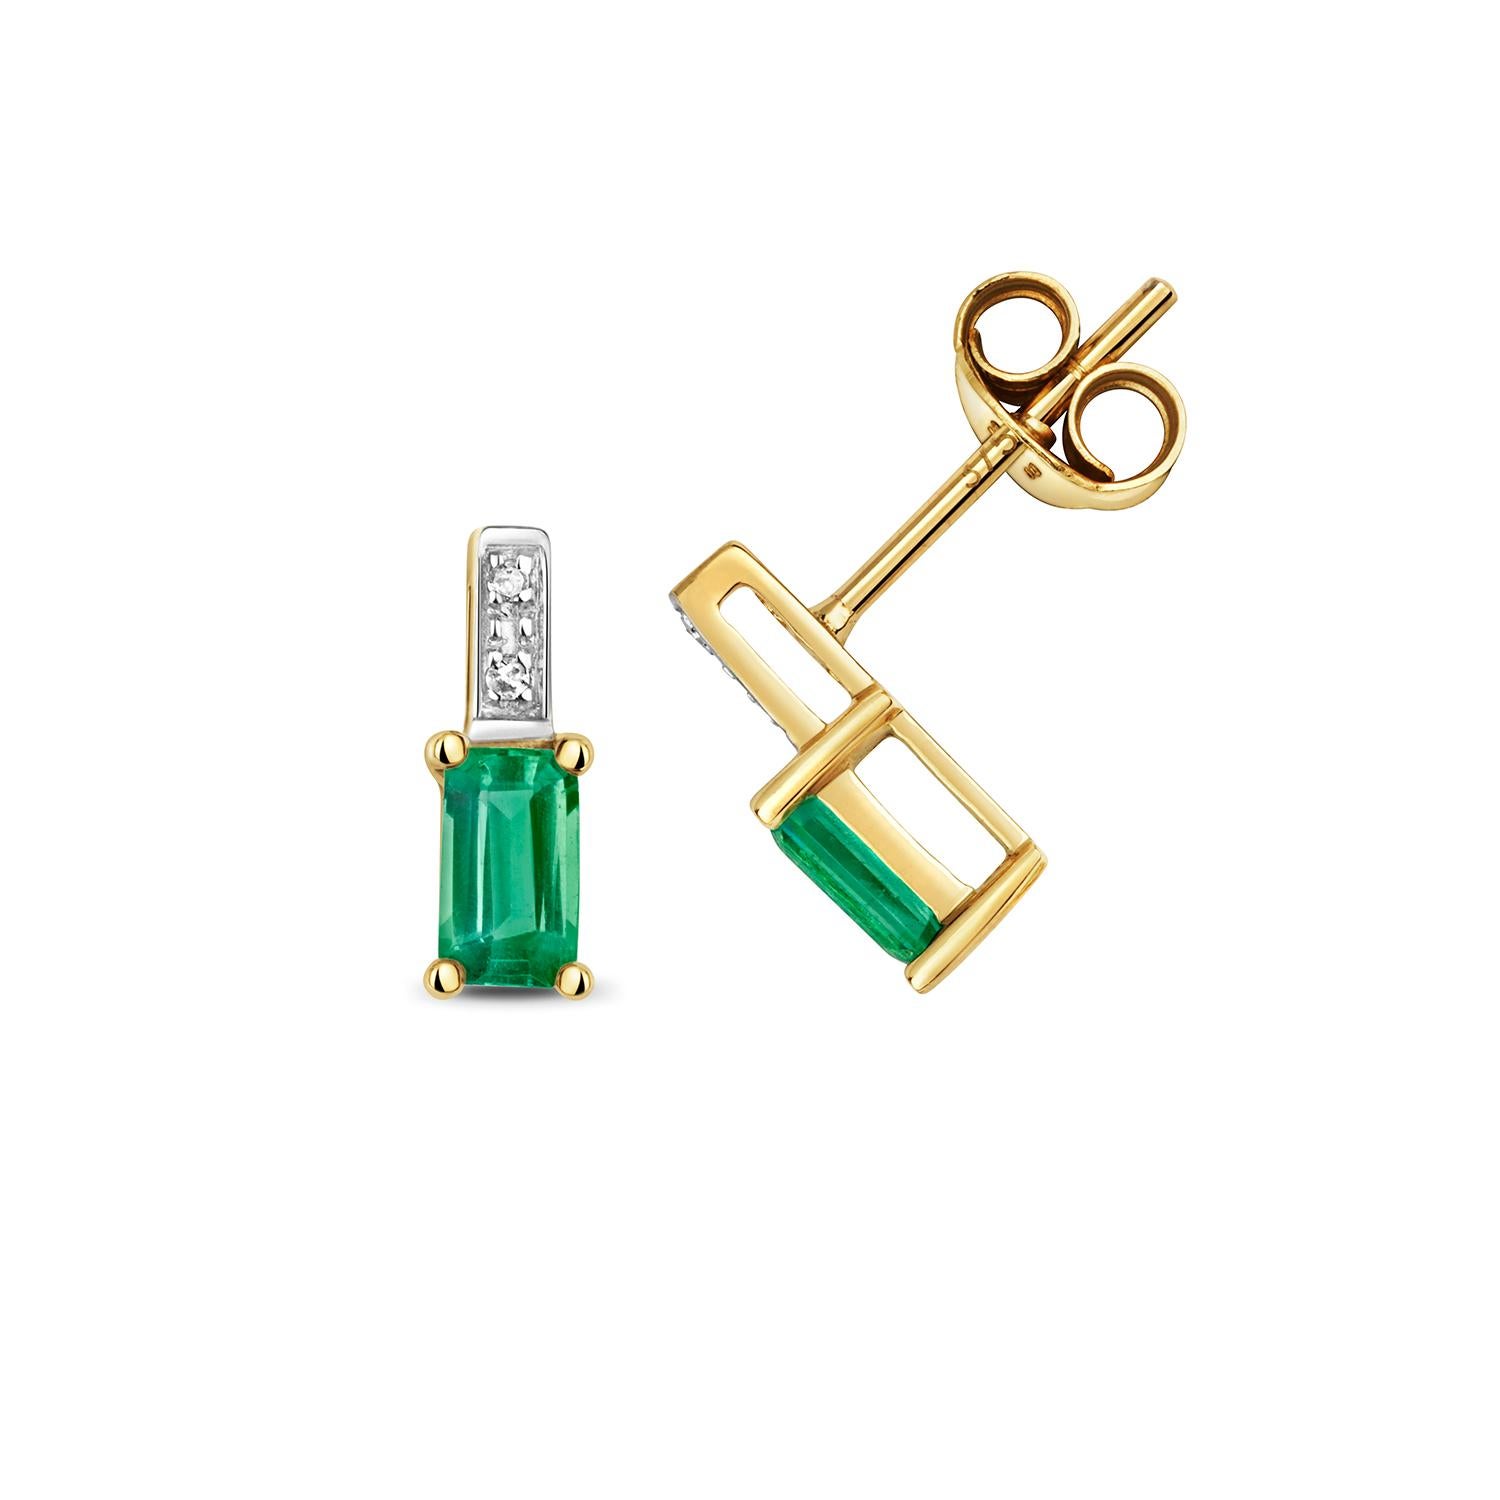 DIAMOND AND EMERALD EARRINGS

9CT W/G SC/0.01 EMD/0.45CT

Weight: 0.82g

Number Of Stones:2+2+74

Total Carates:0.610+0.220+0.200